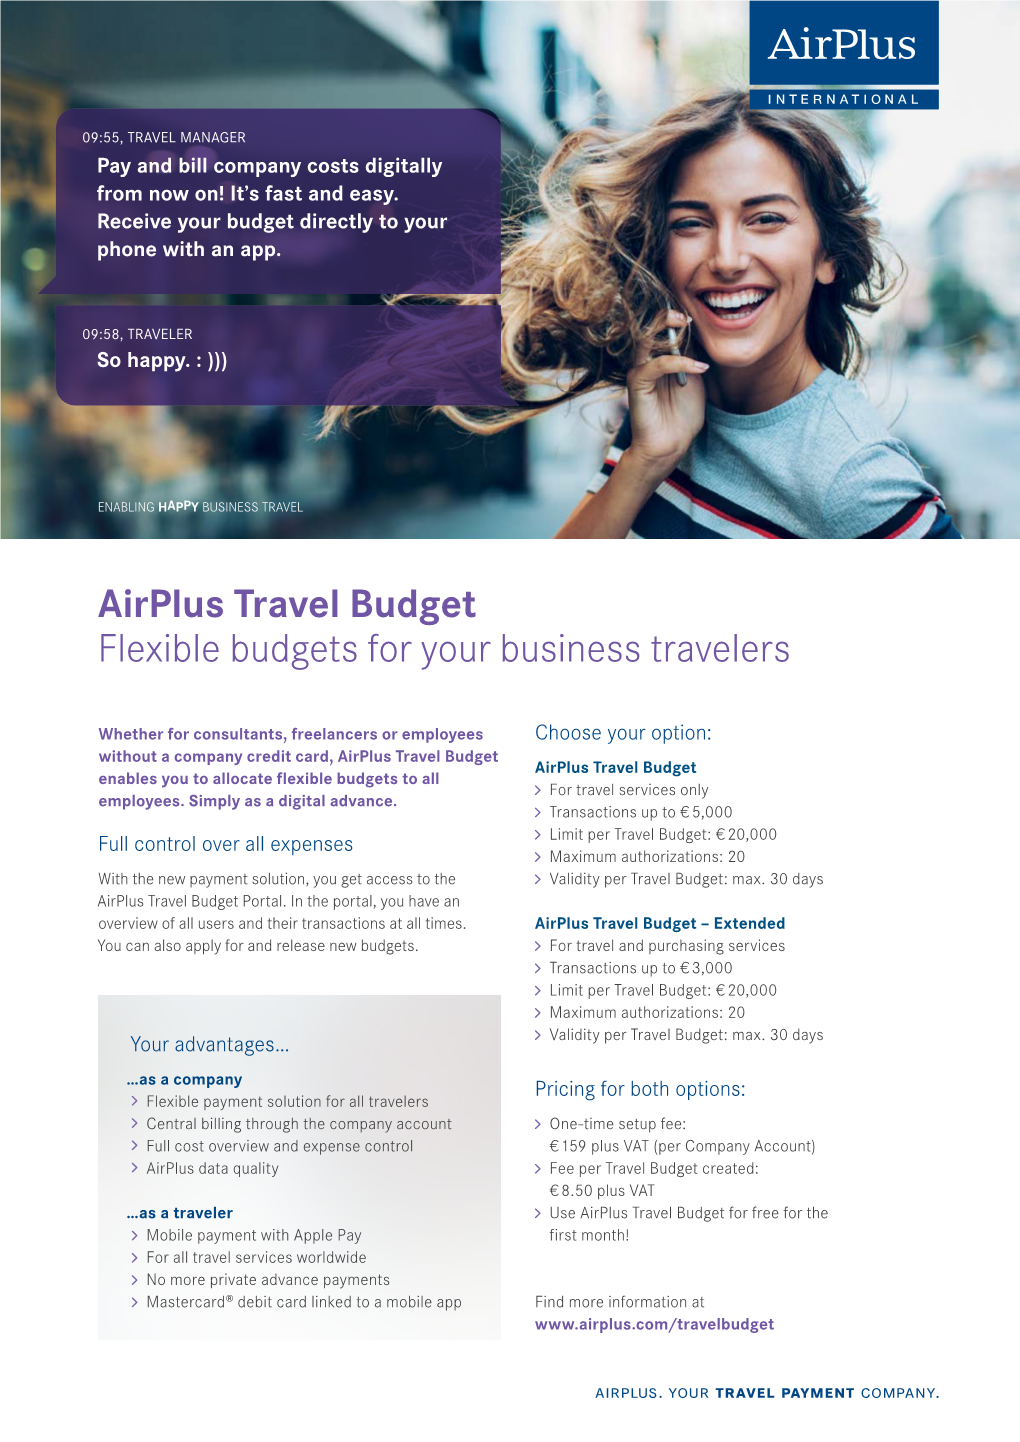 Airplus Travel Budget Flexible Budgets for Your Business Travelers